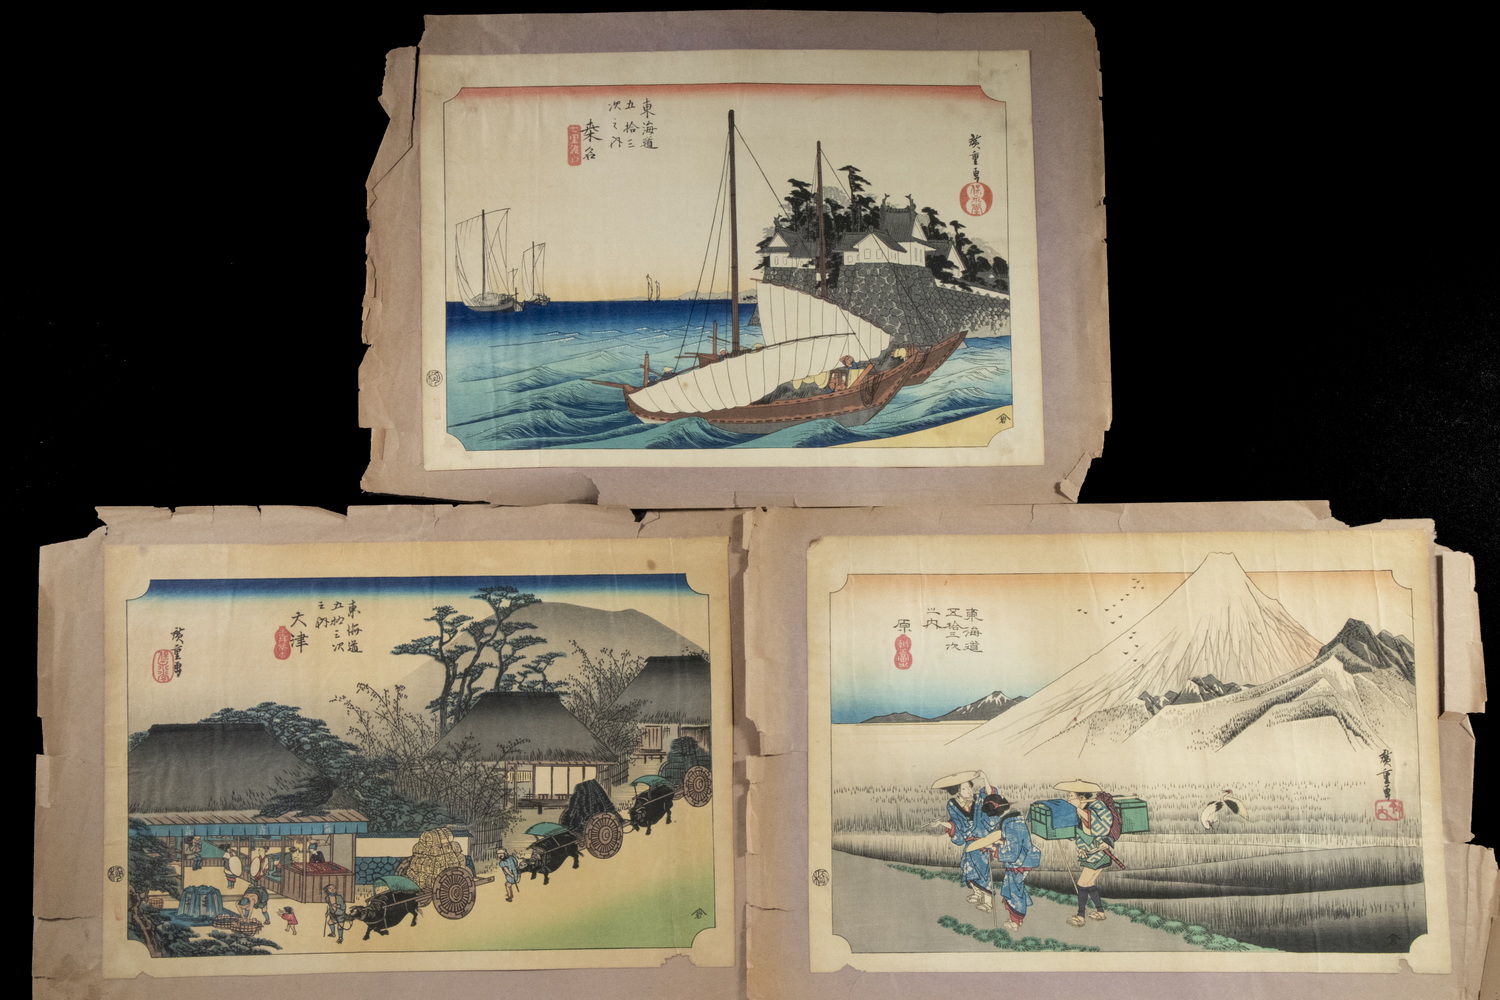  3 JAPANESE WOODBLOCK PRINTS BY 33d684